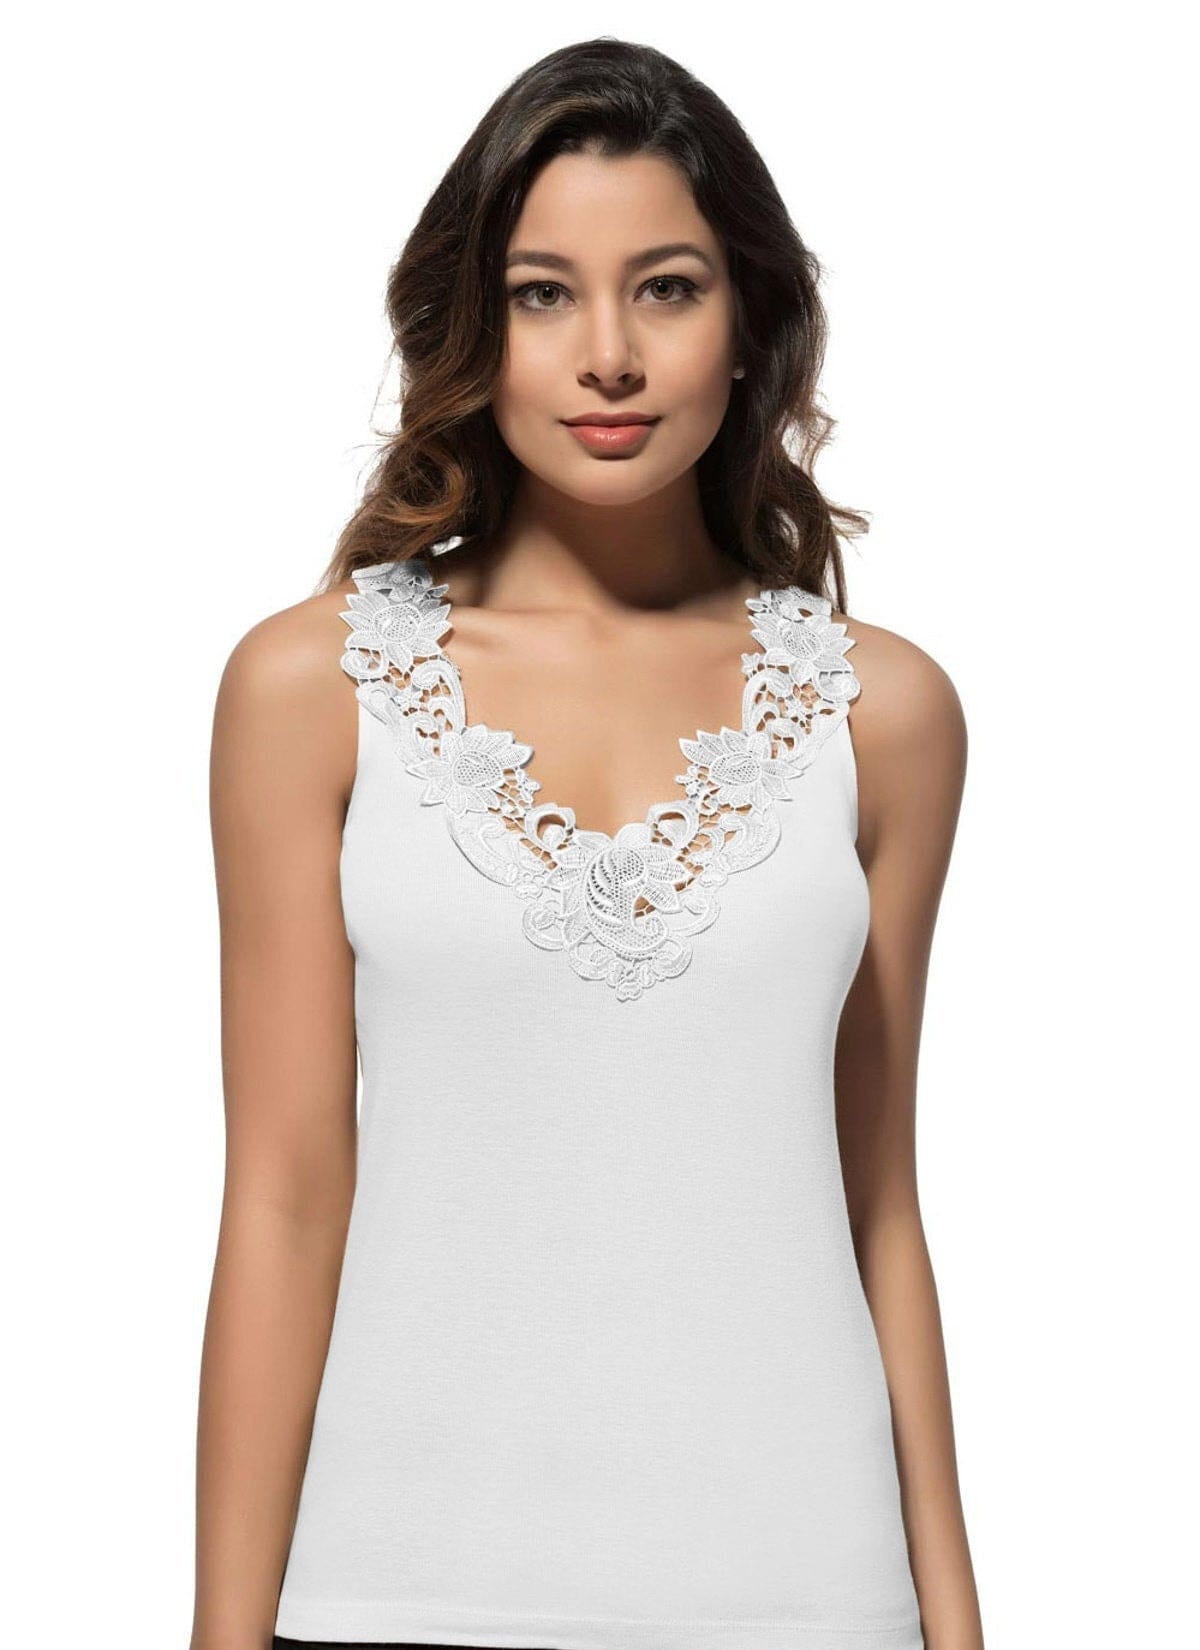 White Lace Tank Top -  Canada